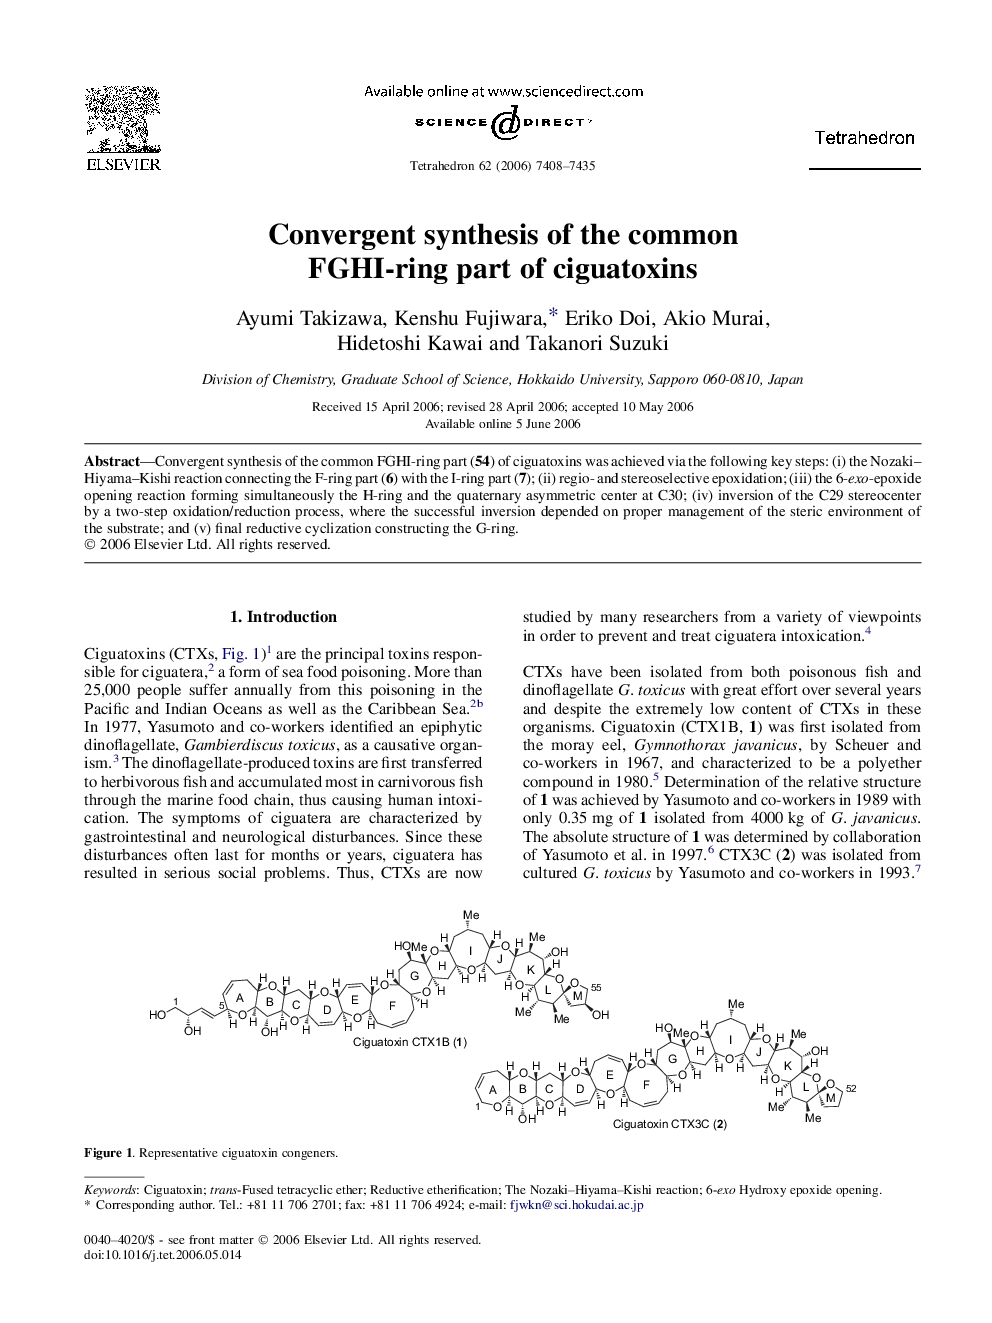 Convergent synthesis of the common FGHI-ring part of ciguatoxins